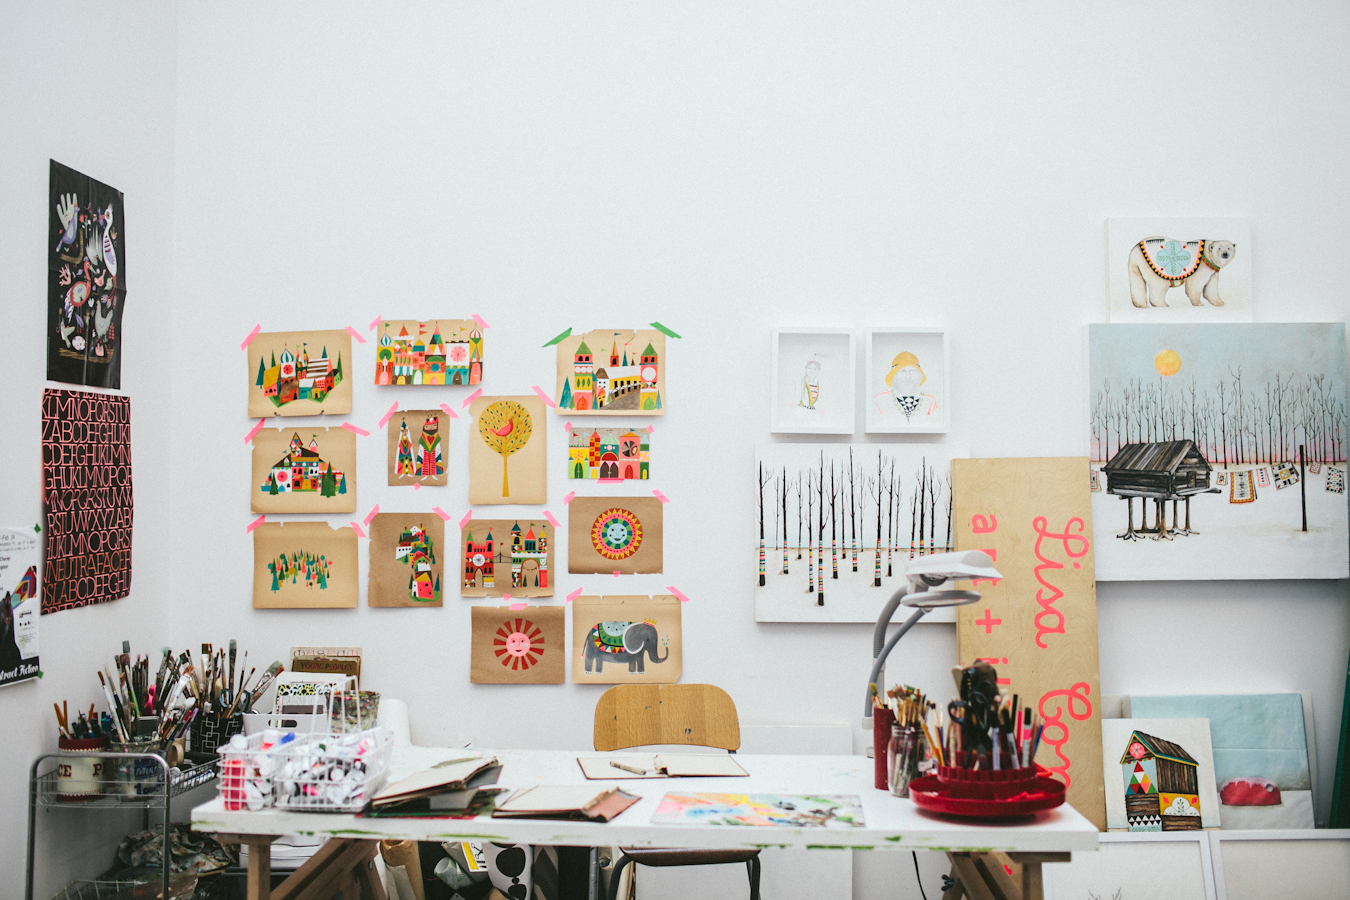 lisa congdon : THink! - an interview with the artist about her tattoos